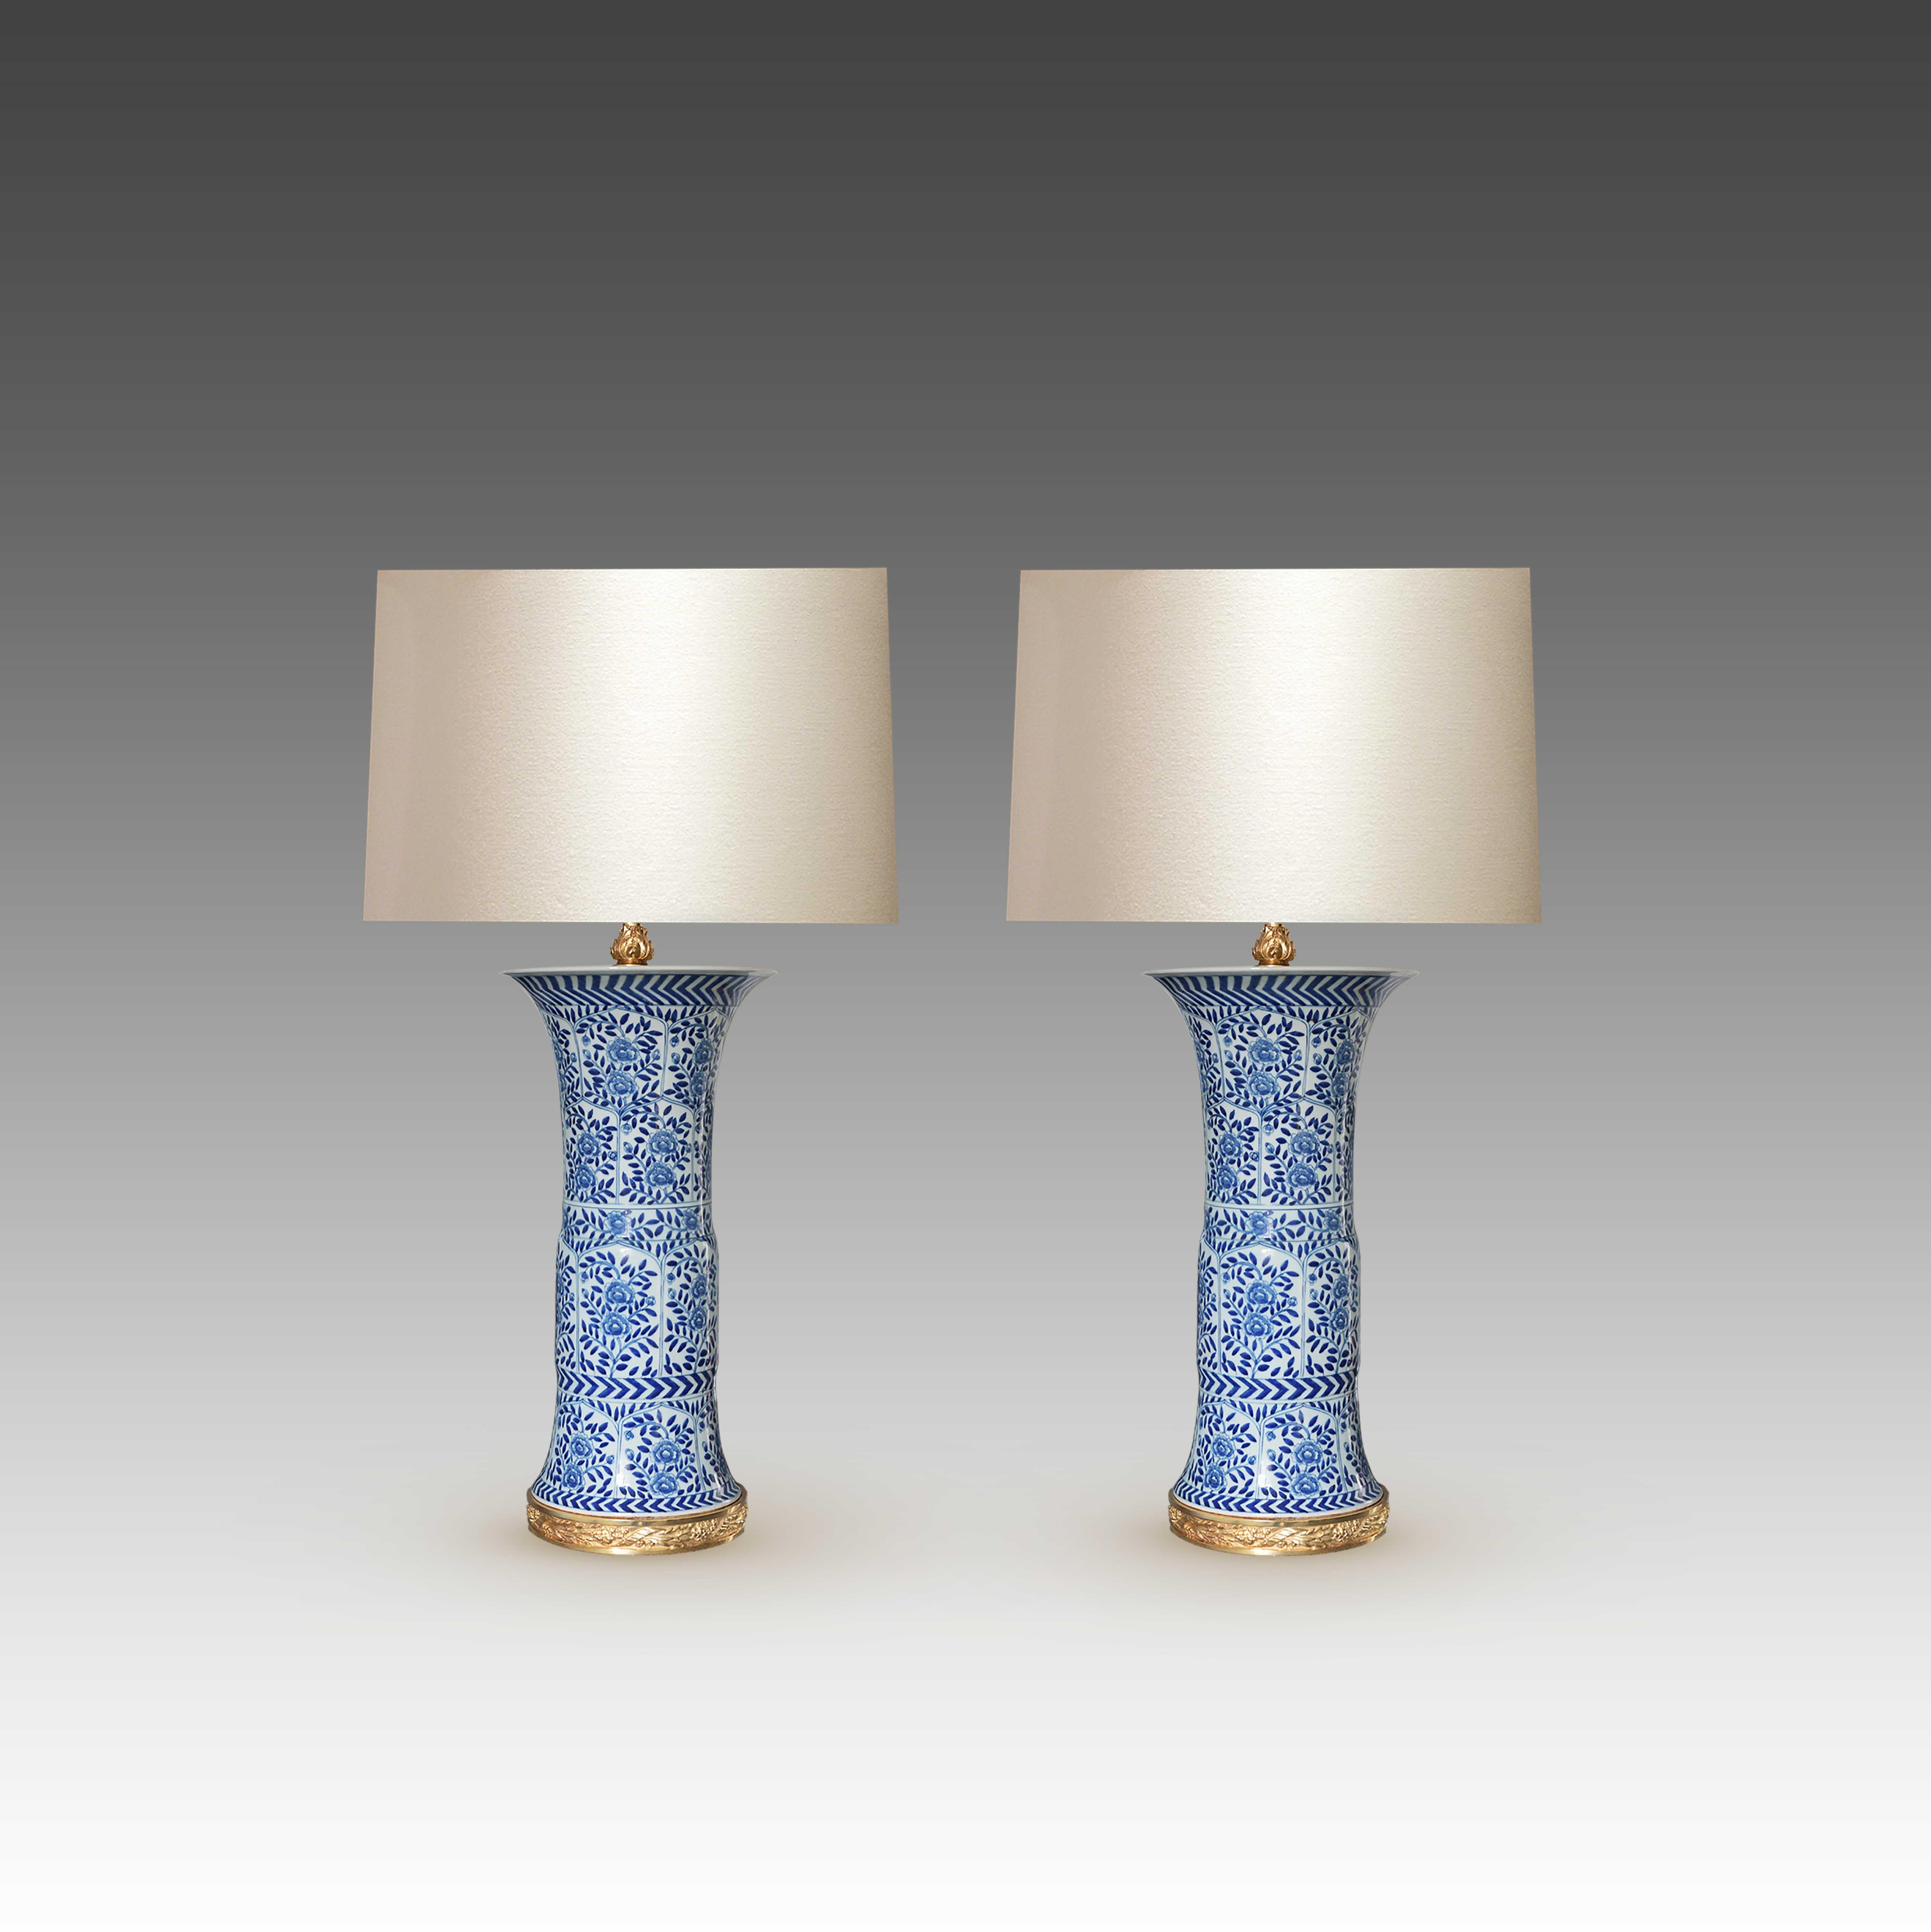 Pair of fine painted blue and white porcelain lamps other fine cast gilt-bronze bases.
To the top of the porcelain vase: 20